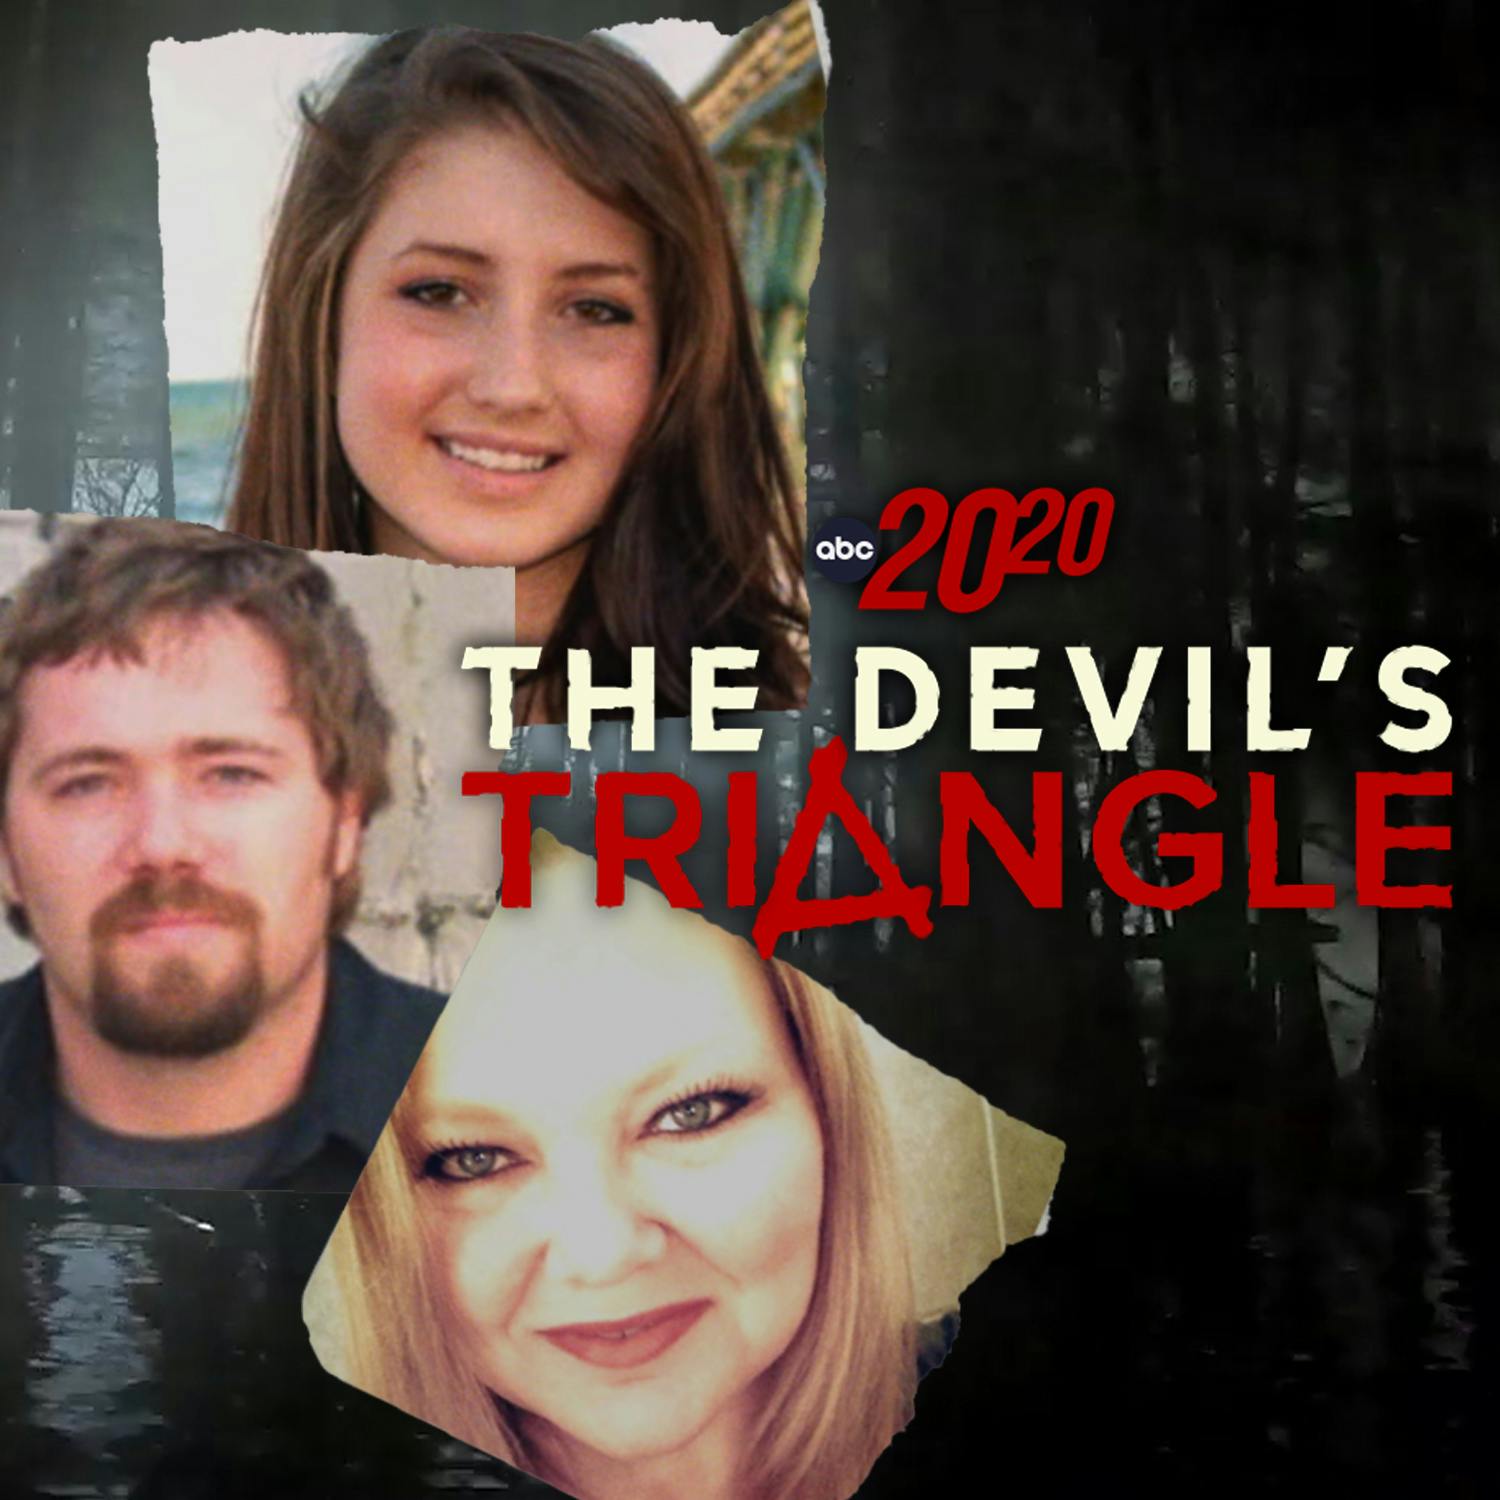 The Devil's Triangle by ABC News